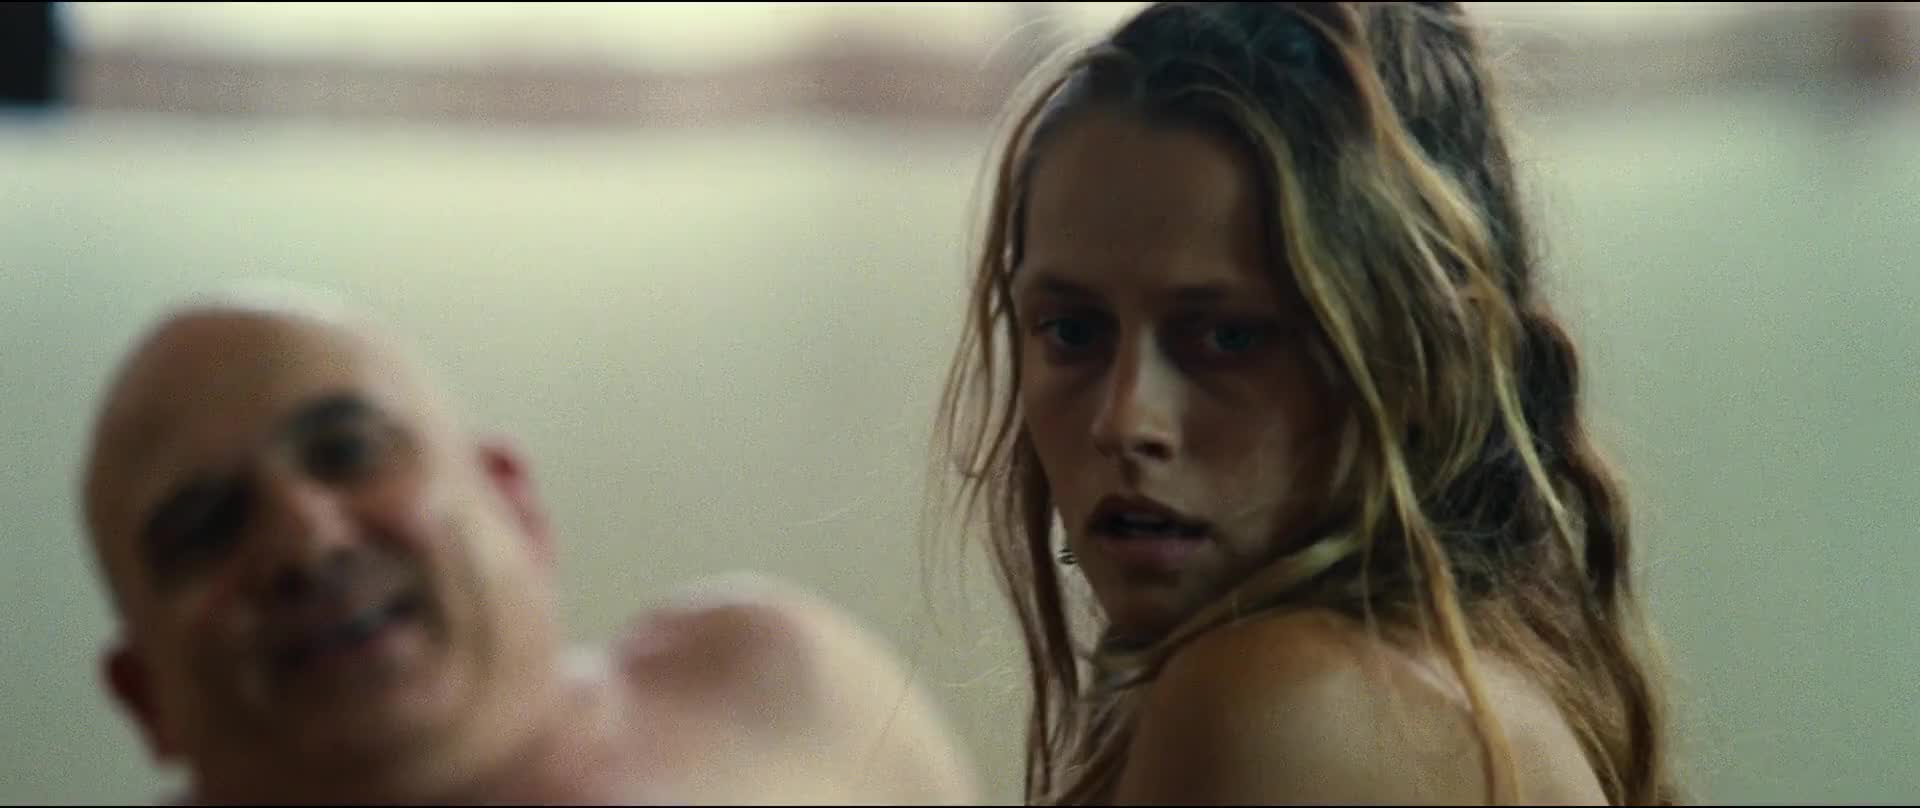 Teresa Palmer sexy scene in message in the king